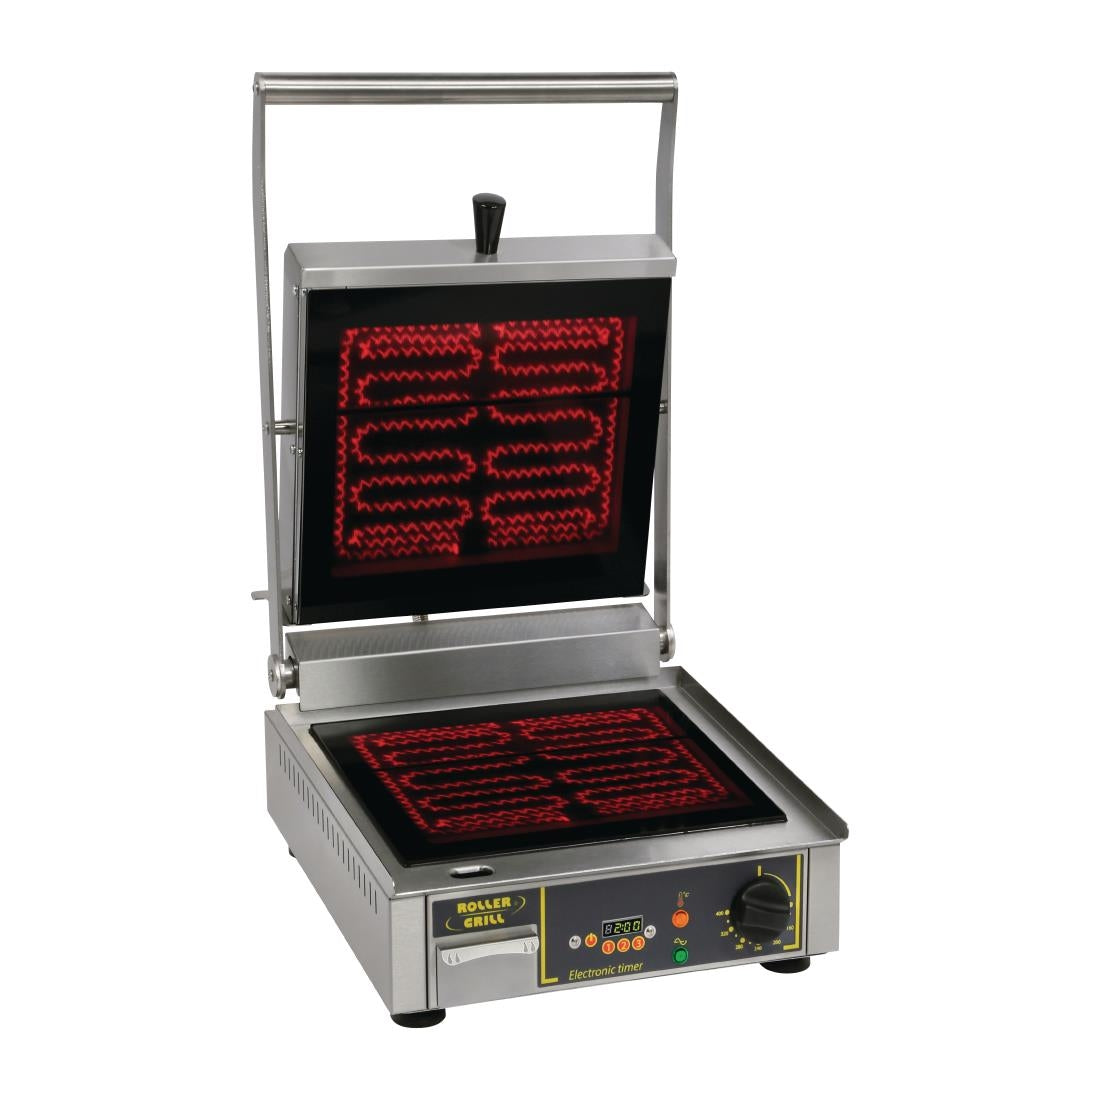 FE146 Roller Grill Premium VC FT Single Ribbed Contact Grill JD Catering Equipment Solutions Ltd